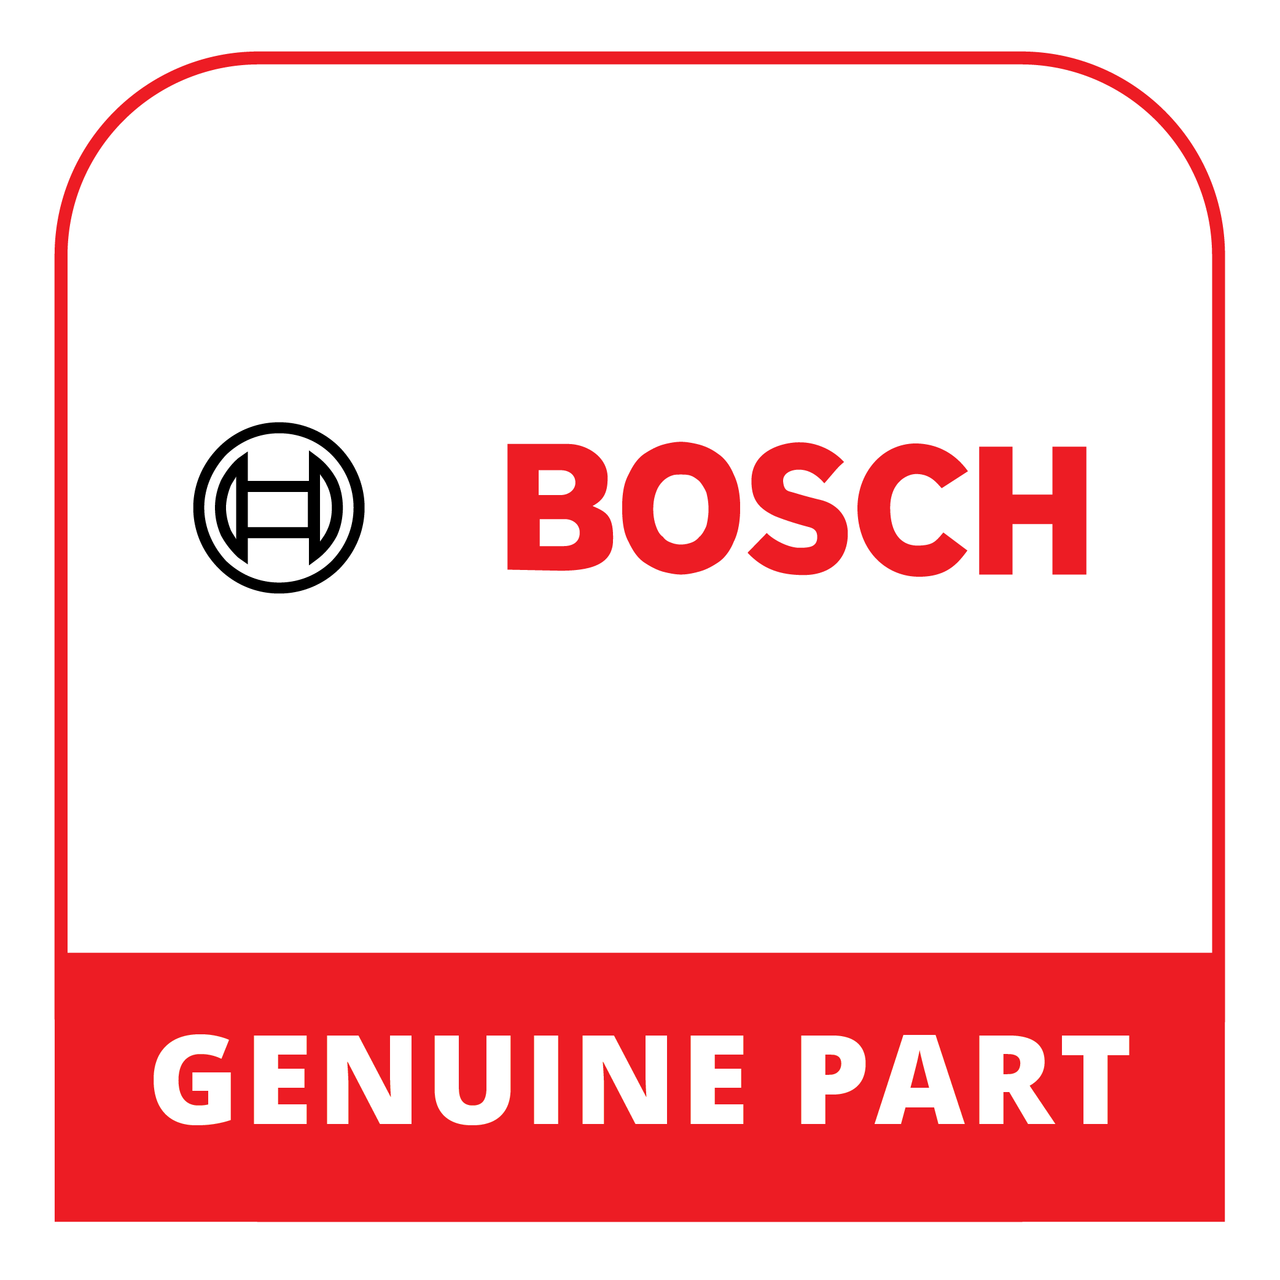 Bosch (Thermador) 20004143 - Drawer - Genuine Bosch (Thermador) Part